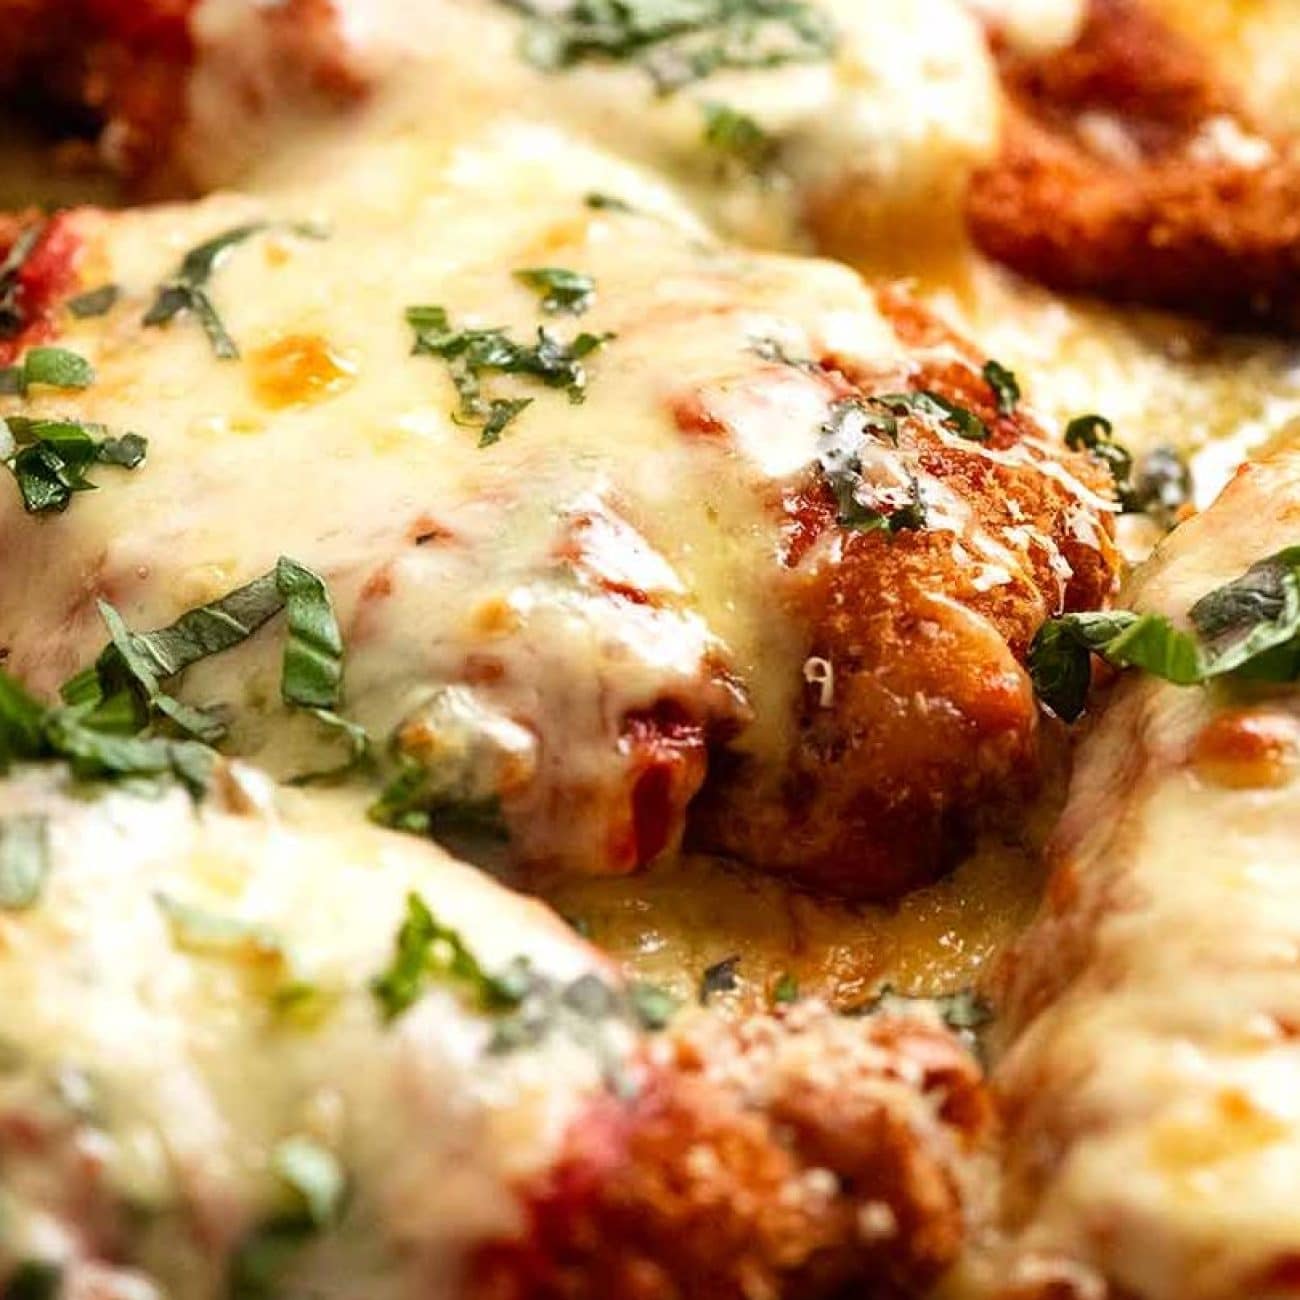 Chicken Cutlet Parmesan With Tomato Sauce